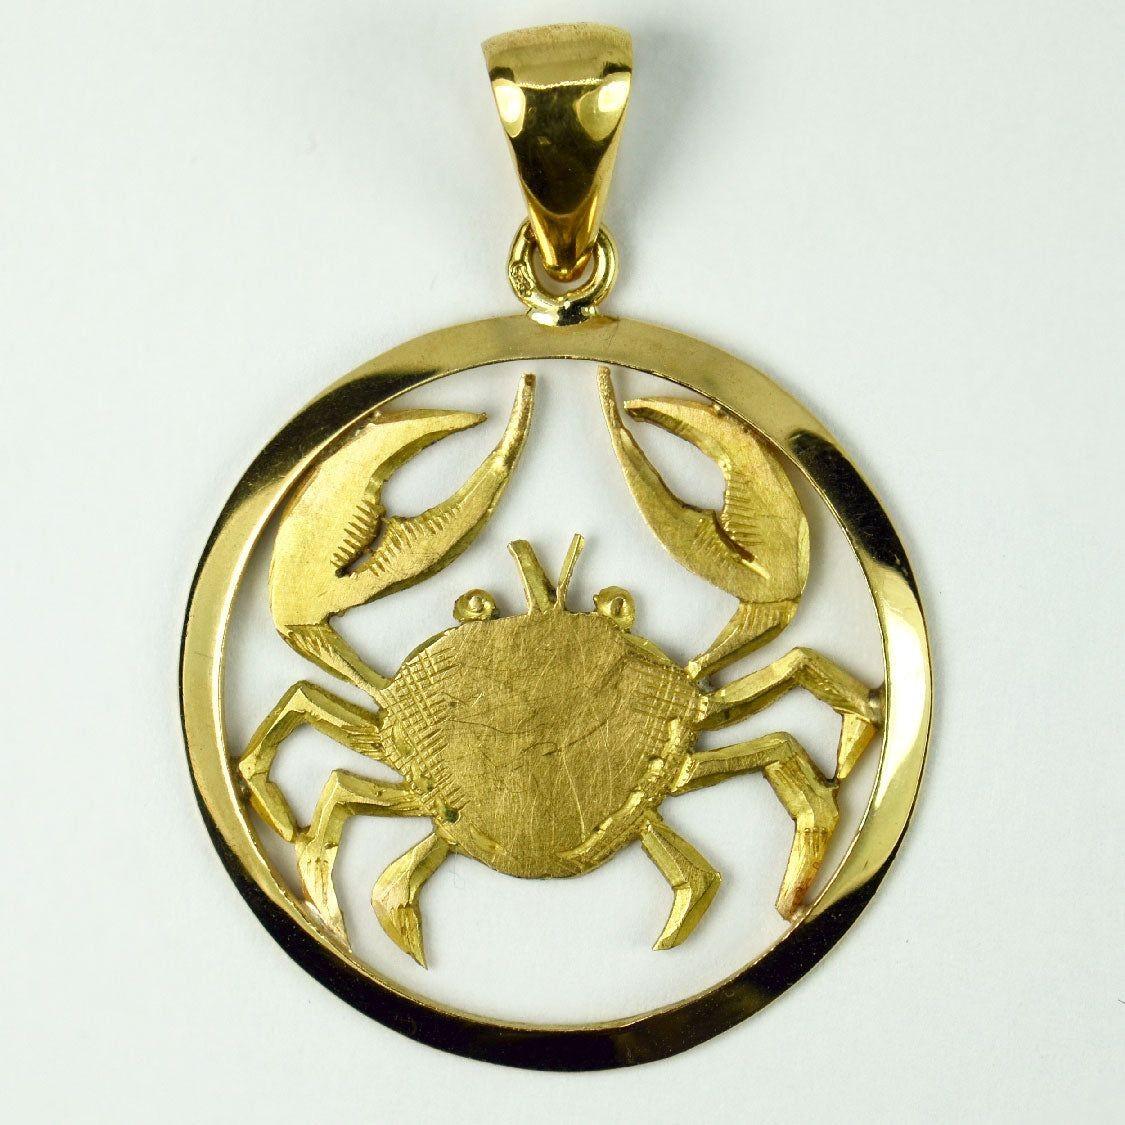 A French 18 karat (18K) yellow gold charm pendant designed as the Zodiac sign of Cancer depicting a crab. Stamped with the eagles head for French manufacture and 18 karat gold with an unknown maker’s mark.

Dimensions: 3.1 x 2.7 x 0.15 cm (not